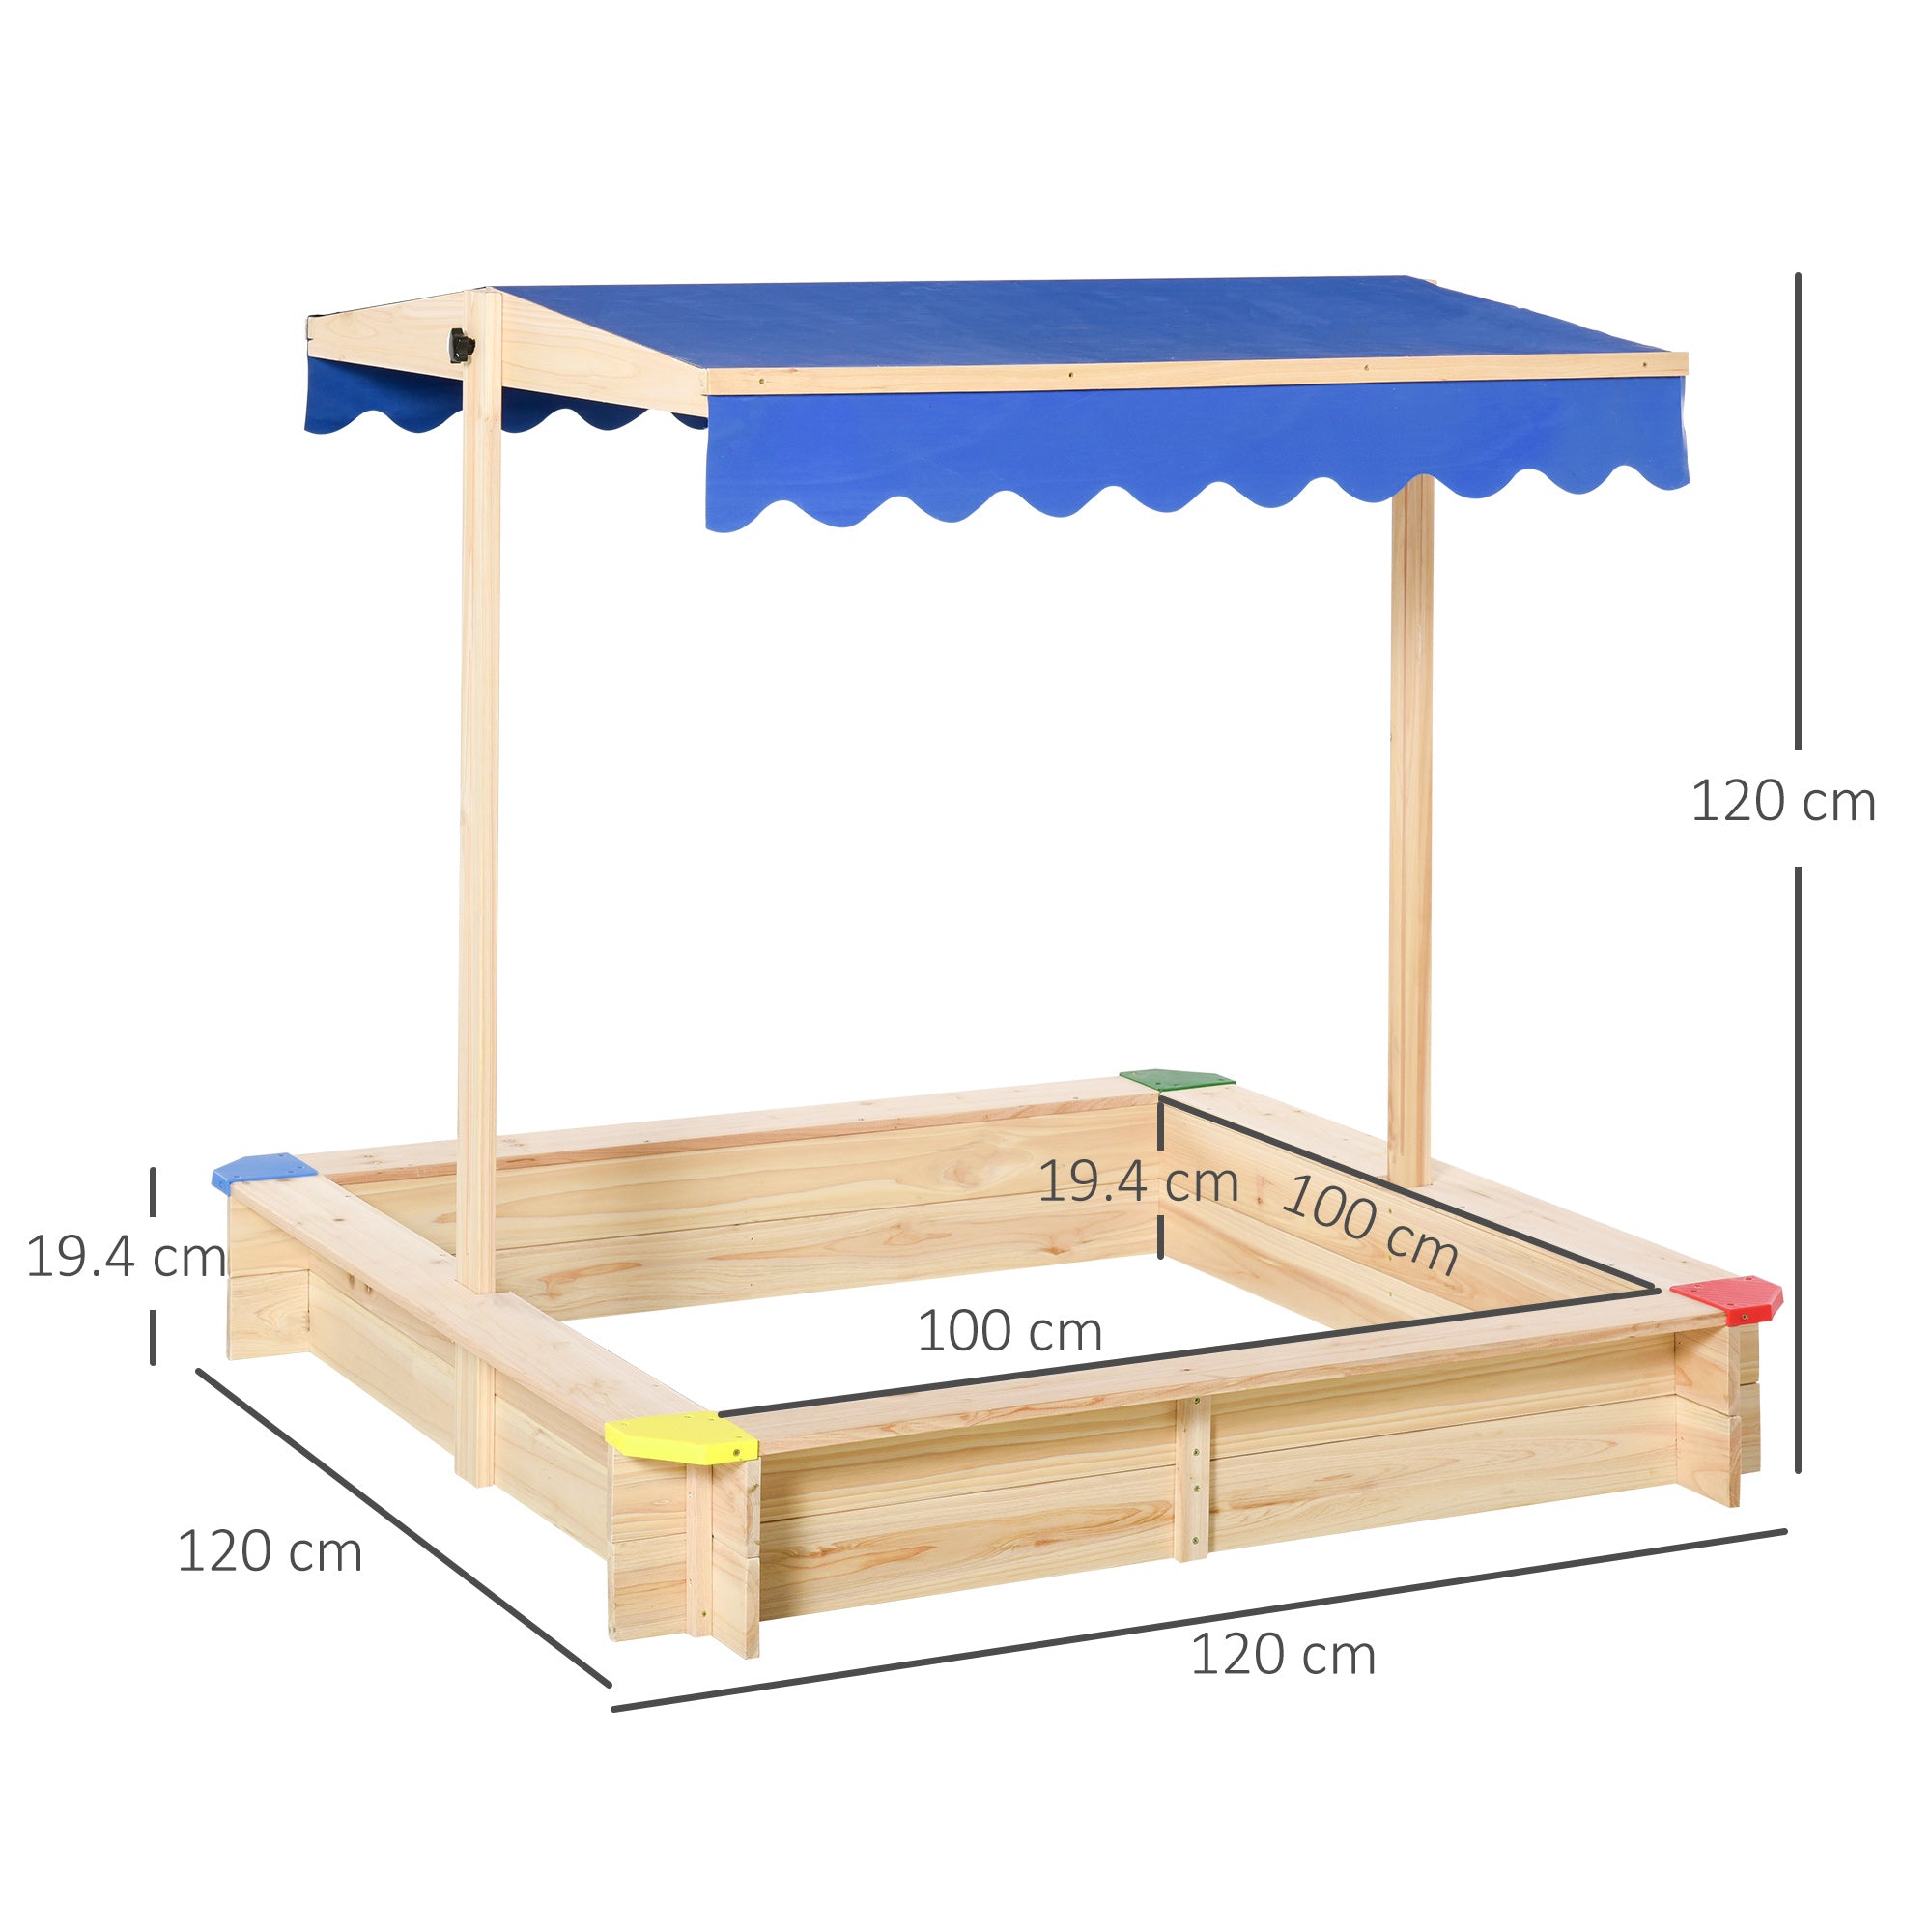 Outsunny Kids Wooden Sandpit Children Cabana Square Sandbox Outdoor Backyard Playset Play Station Adjustable Canopy Bench Seat 120x120x120cm